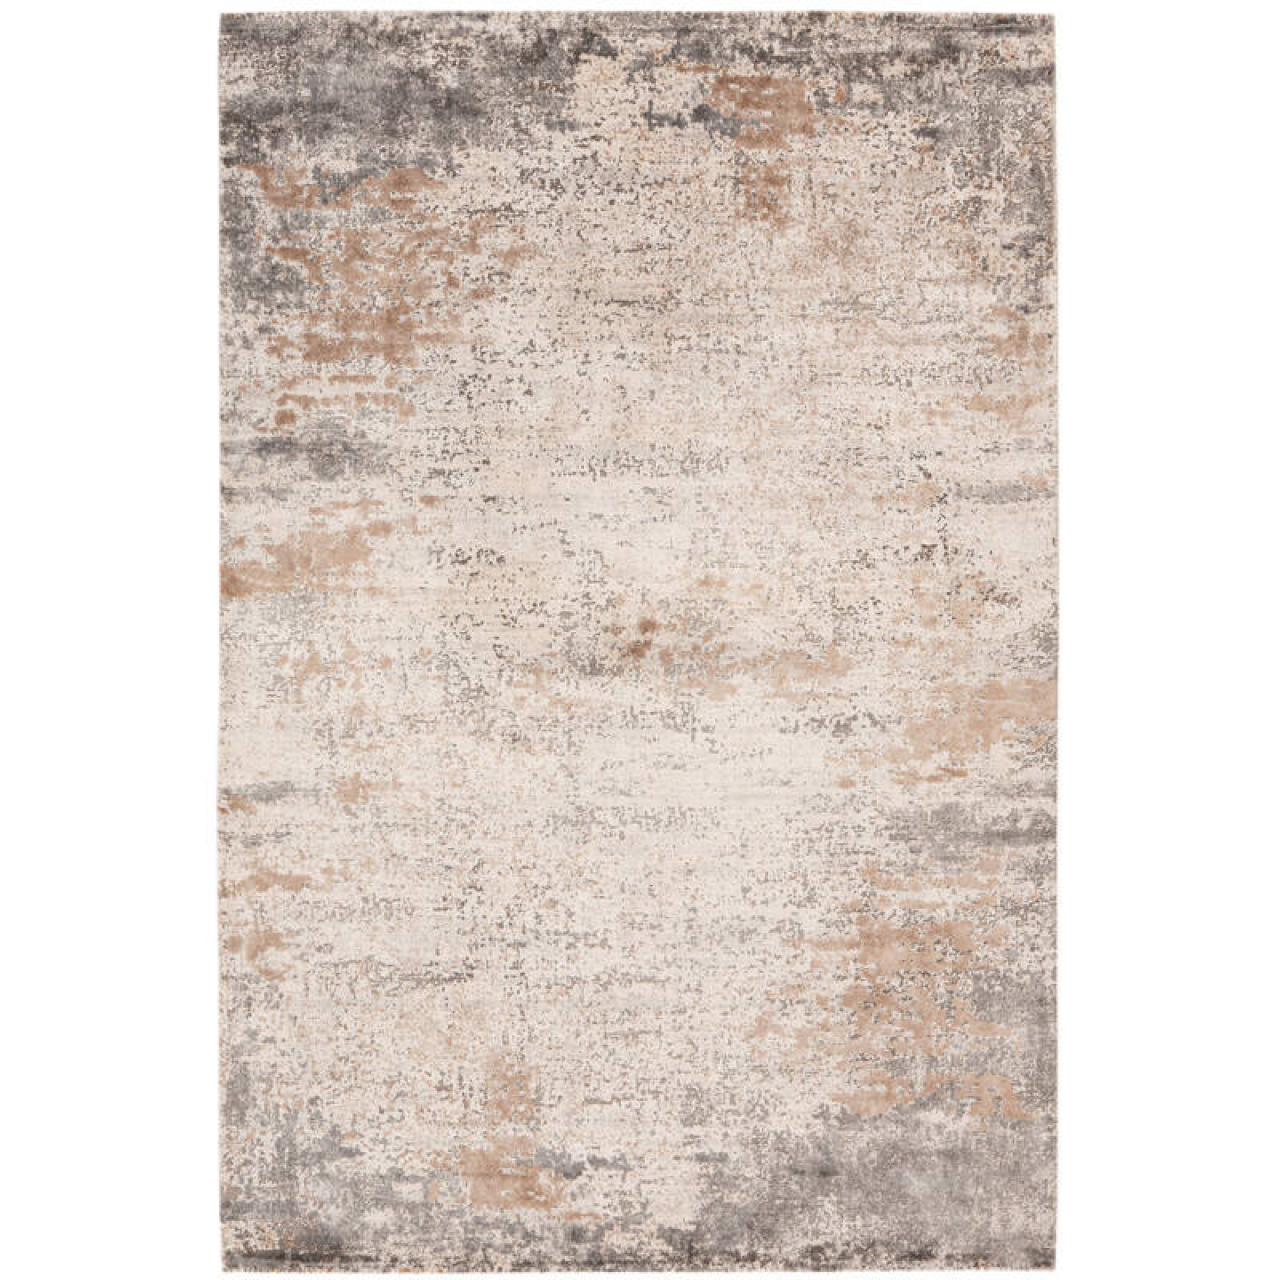 Obsession Haute Couture Jewel 953 Taupe szőnyeg-140x200